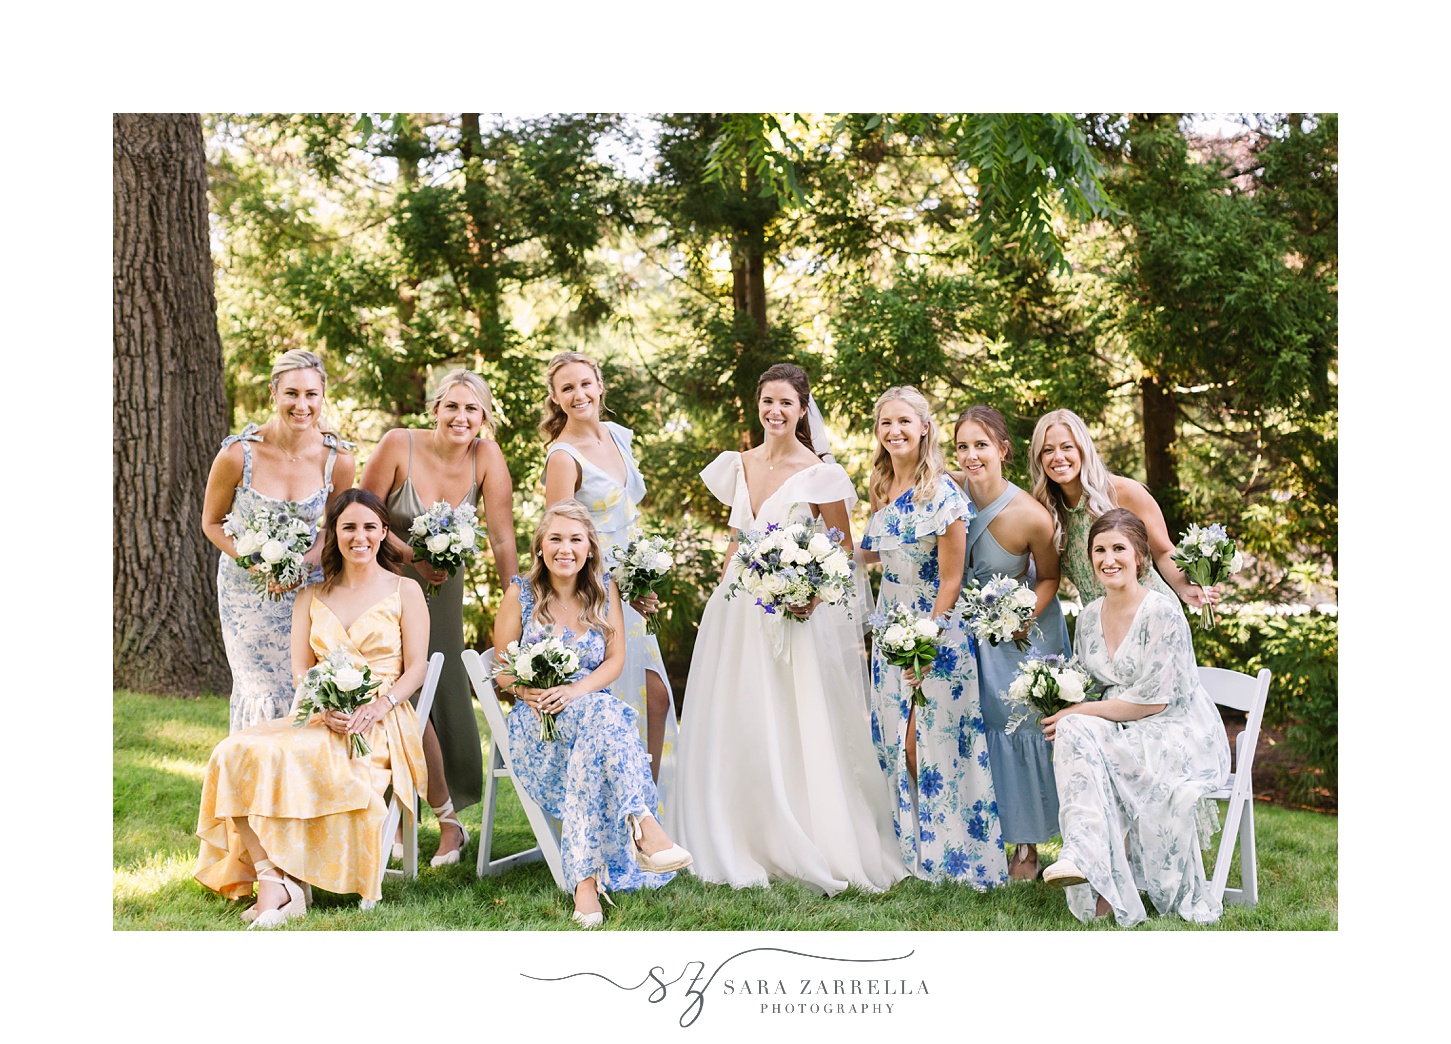 bride poses with bridesmaids in garden party inspired gowns